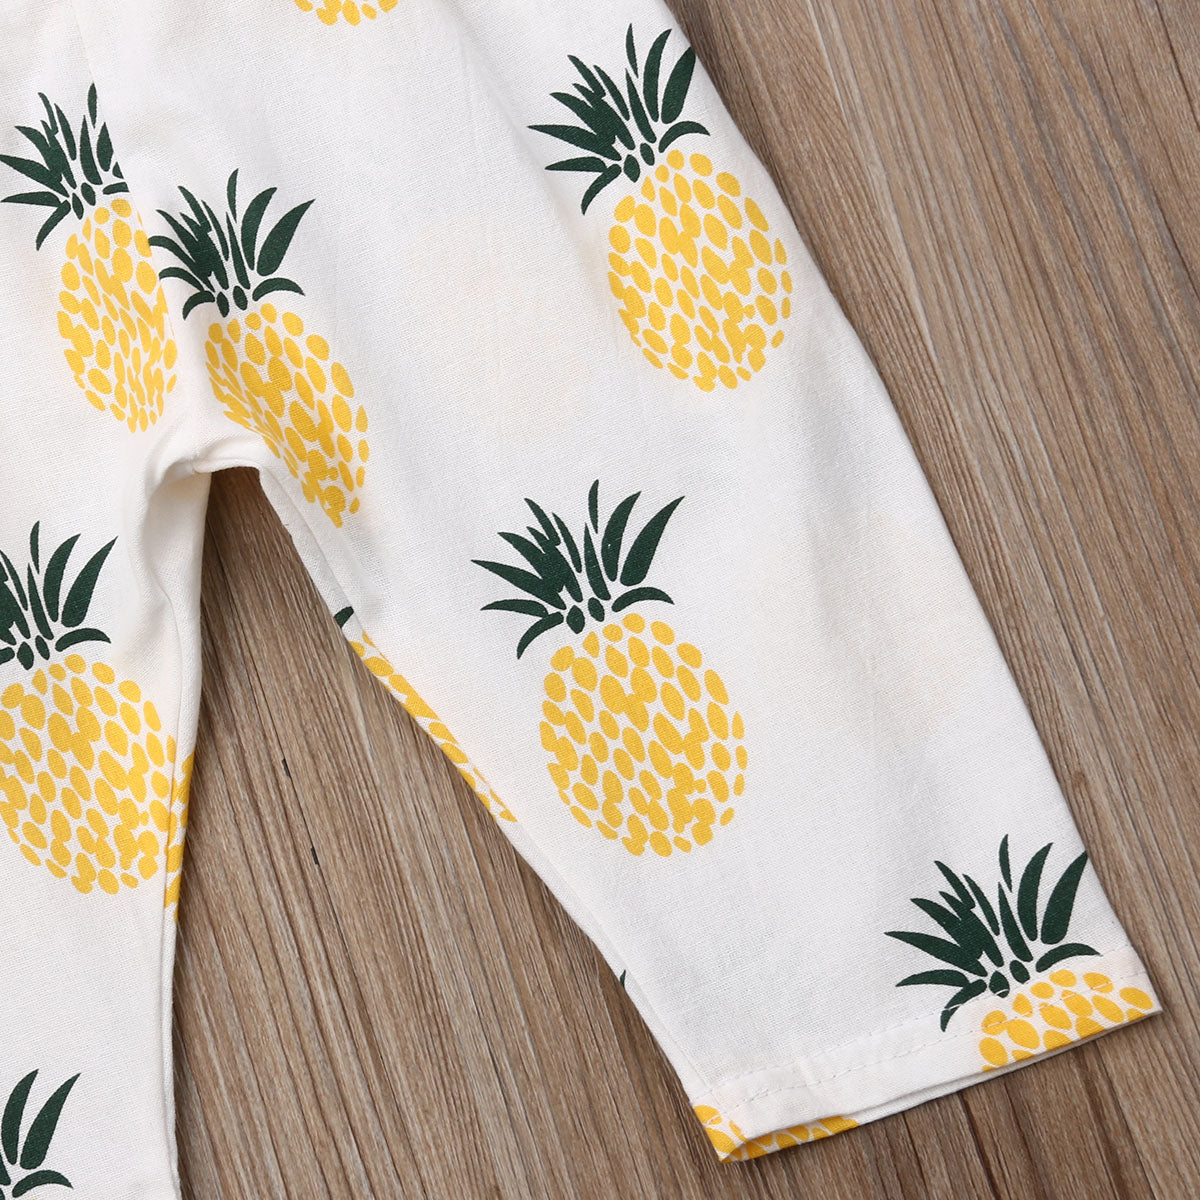 Emmababy Newborn Baby Girl Clothes Sleevless Ruffle Pineapple Print Romper Jumpsuit Headband 2Pcs Outfits Clothes Summer - Jumpsuit - NosCiBe